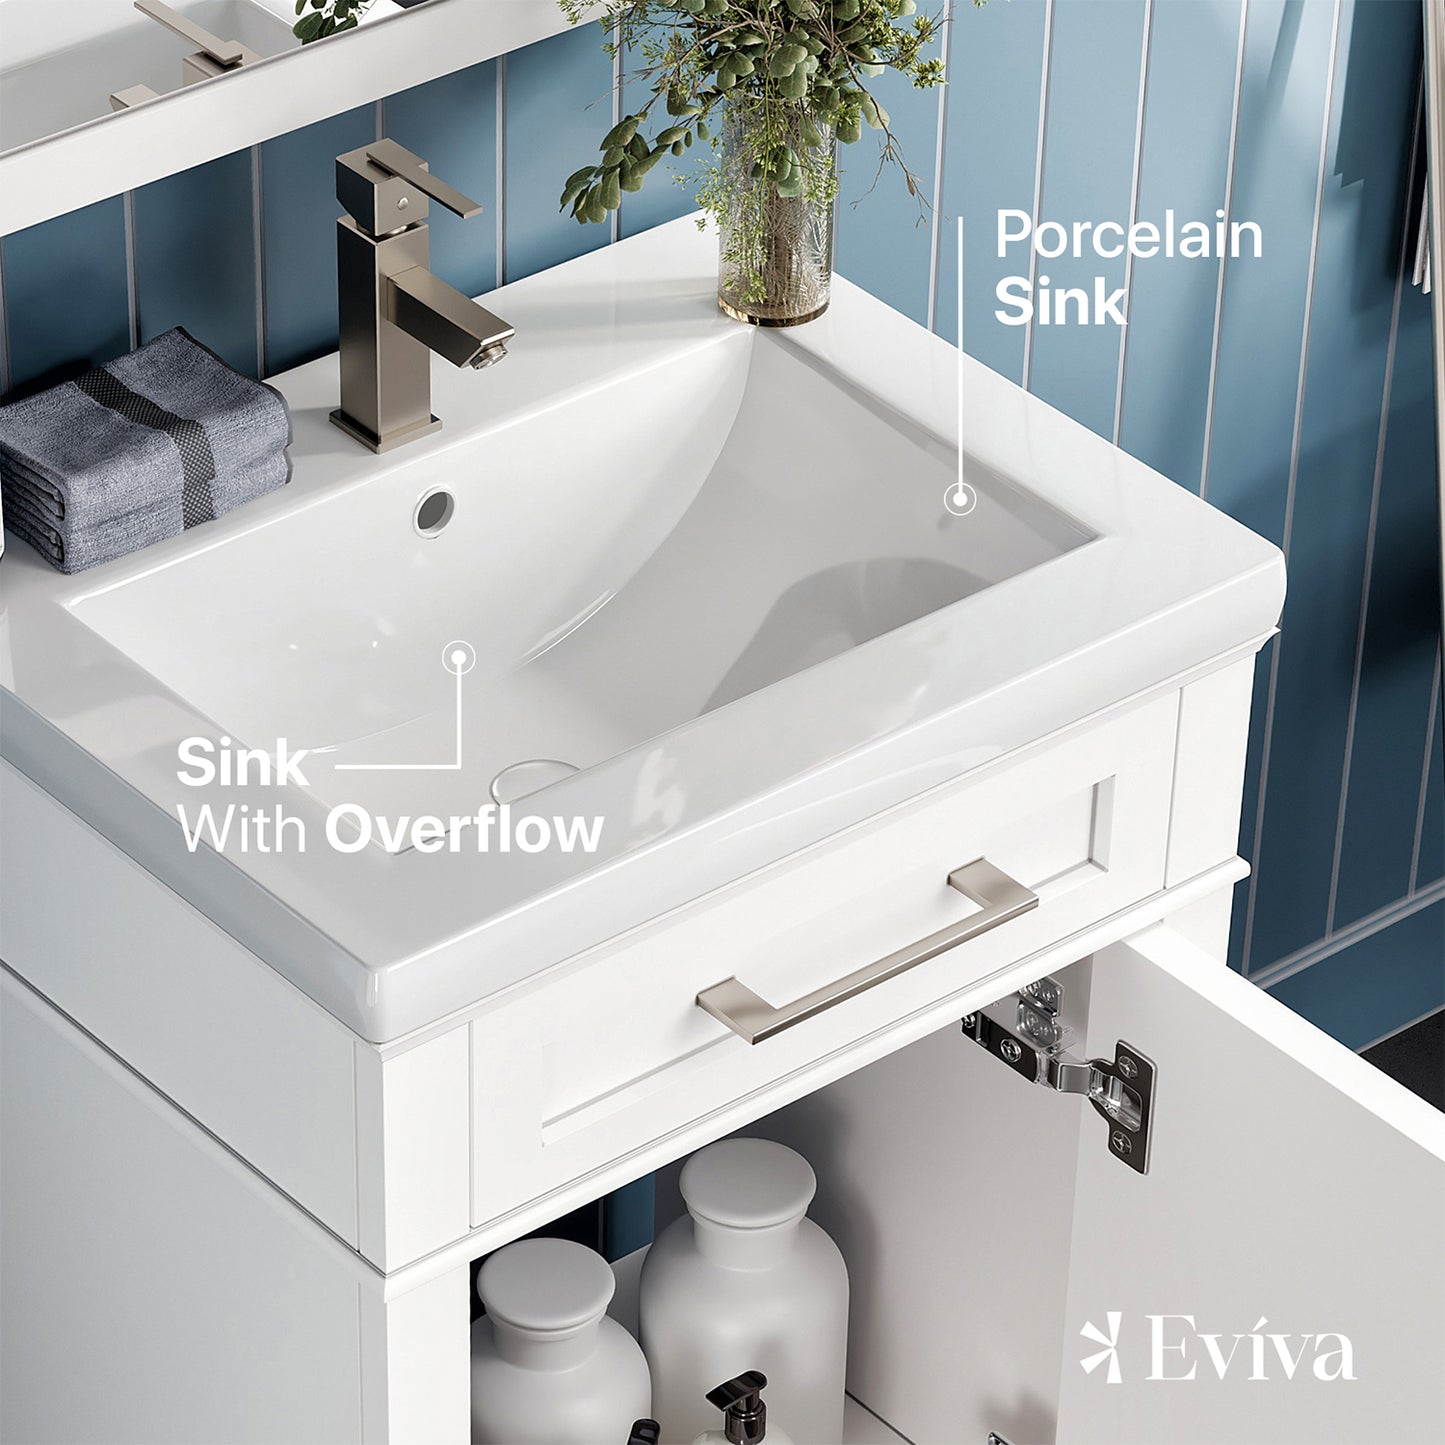 EVIVA Garci 24 Inch White Transitional Bathroom Vanity with Porcelain Top